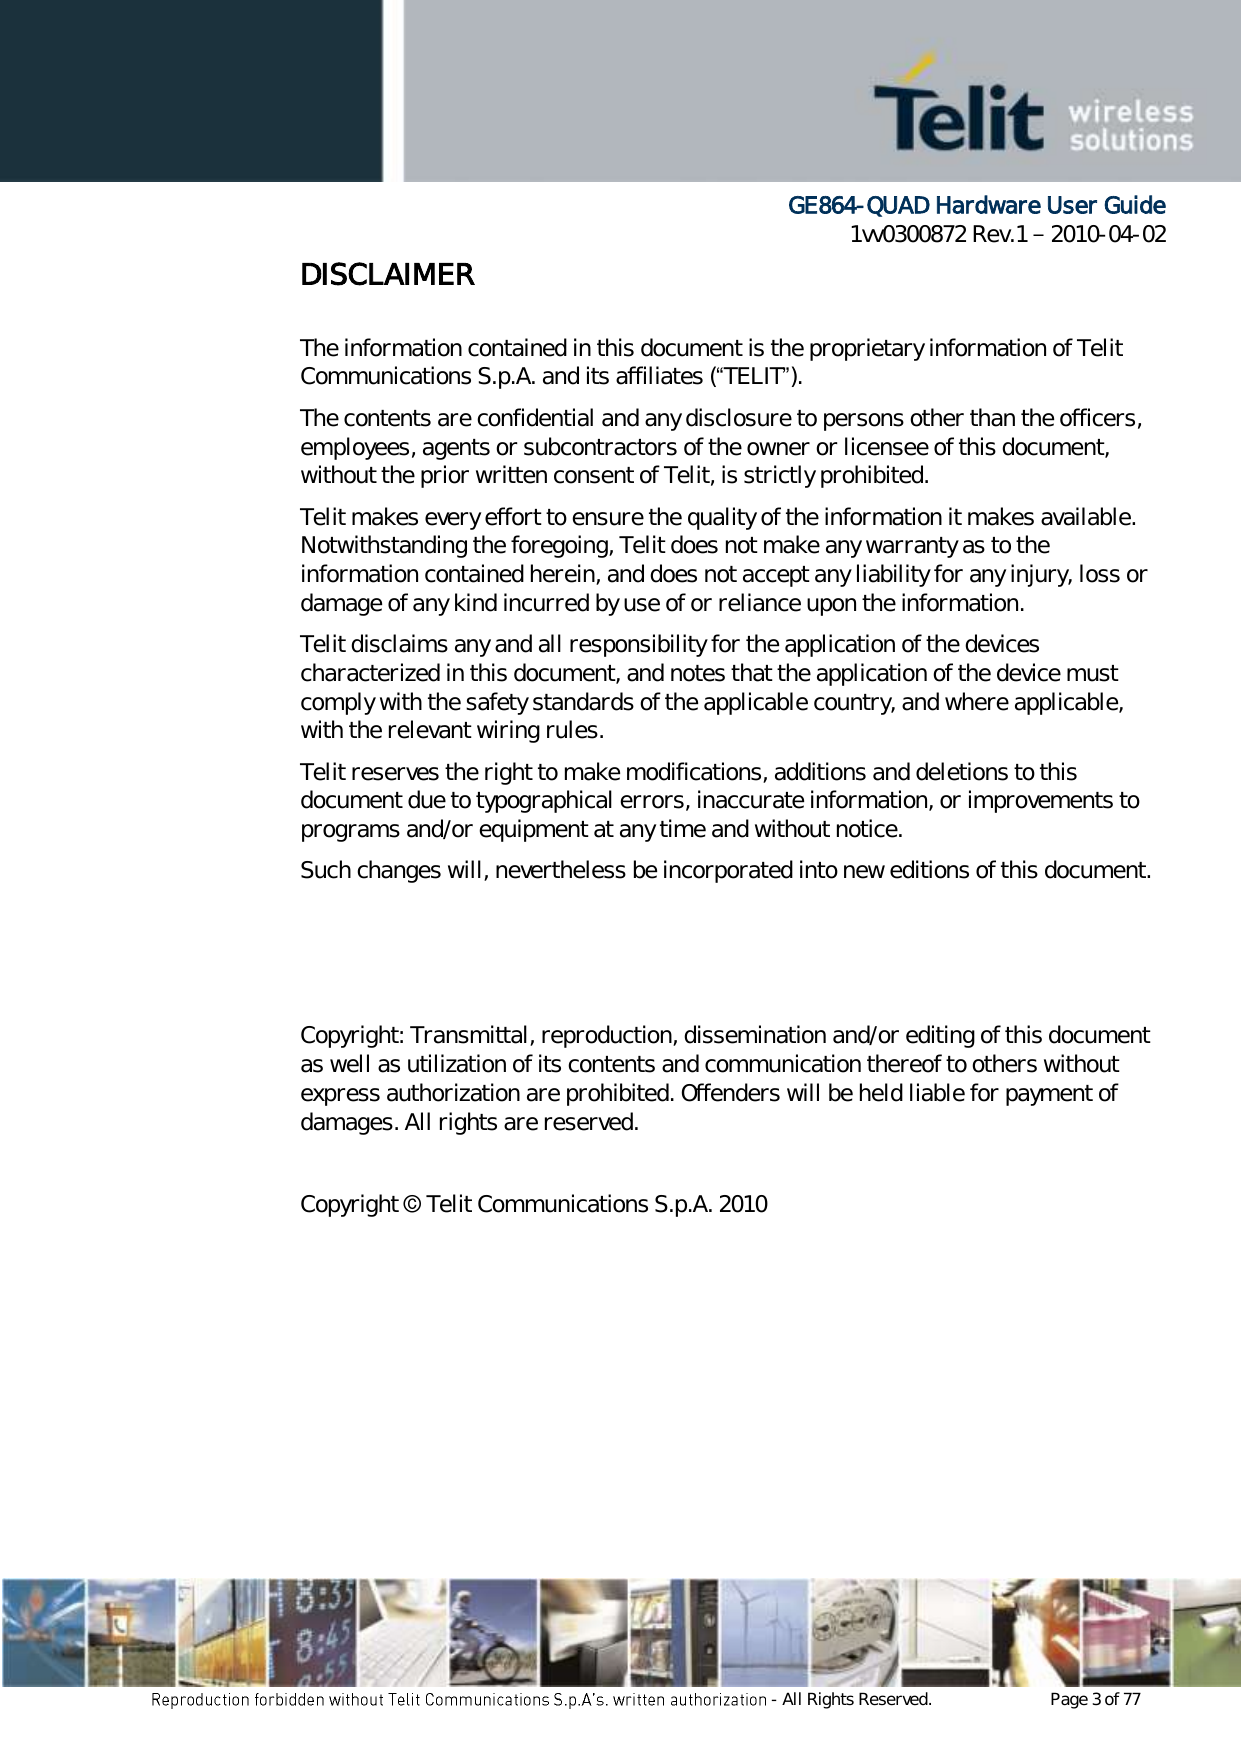      GE864-QUAD Hardware User Guide 1vv0300872 Rev.1   2010-04-02 - All Rights Reserved.    Page 3 of 77  DISCLAIMER   The information contained in this document is the proprietary information of Telit Communications S.p.A. and its affiliates (“TELIT”).  The contents are confidential and any disclosure to persons other than the officers, employees, agents or subcontractors of the owner or licensee of this document, without the prior written consent of Telit, is strictly prohibited. Telit makes every effort to ensure the quality of the information it makes available. Notwithstanding the foregoing, Telit does not make any warranty as to the information contained herein, and does not accept any liability for any injury, loss or damage of any kind incurred by use of or reliance upon the information. Telit disclaims any and all responsibility for the application of the devices characterized in this document, and notes that the application of the device must comply with the safety standards of the applicable country, and where applicable, with the relevant wiring rules. Telit reserves the right to make modifications, additions and deletions to this document due to typographical errors, inaccurate information, or improvements to programs and/or equipment at any time and without notice.  Such changes will, nevertheless be incorporated into new editions of this document.    Copyright: Transmittal, reproduction, dissemination and/or editing of this document as well as utilization of its contents and communication thereof to others without express authorization are prohibited. Offenders will be held liable for payment of damages. All rights are reserved.   Copyright © Telit Communications S.p.A. 2010 